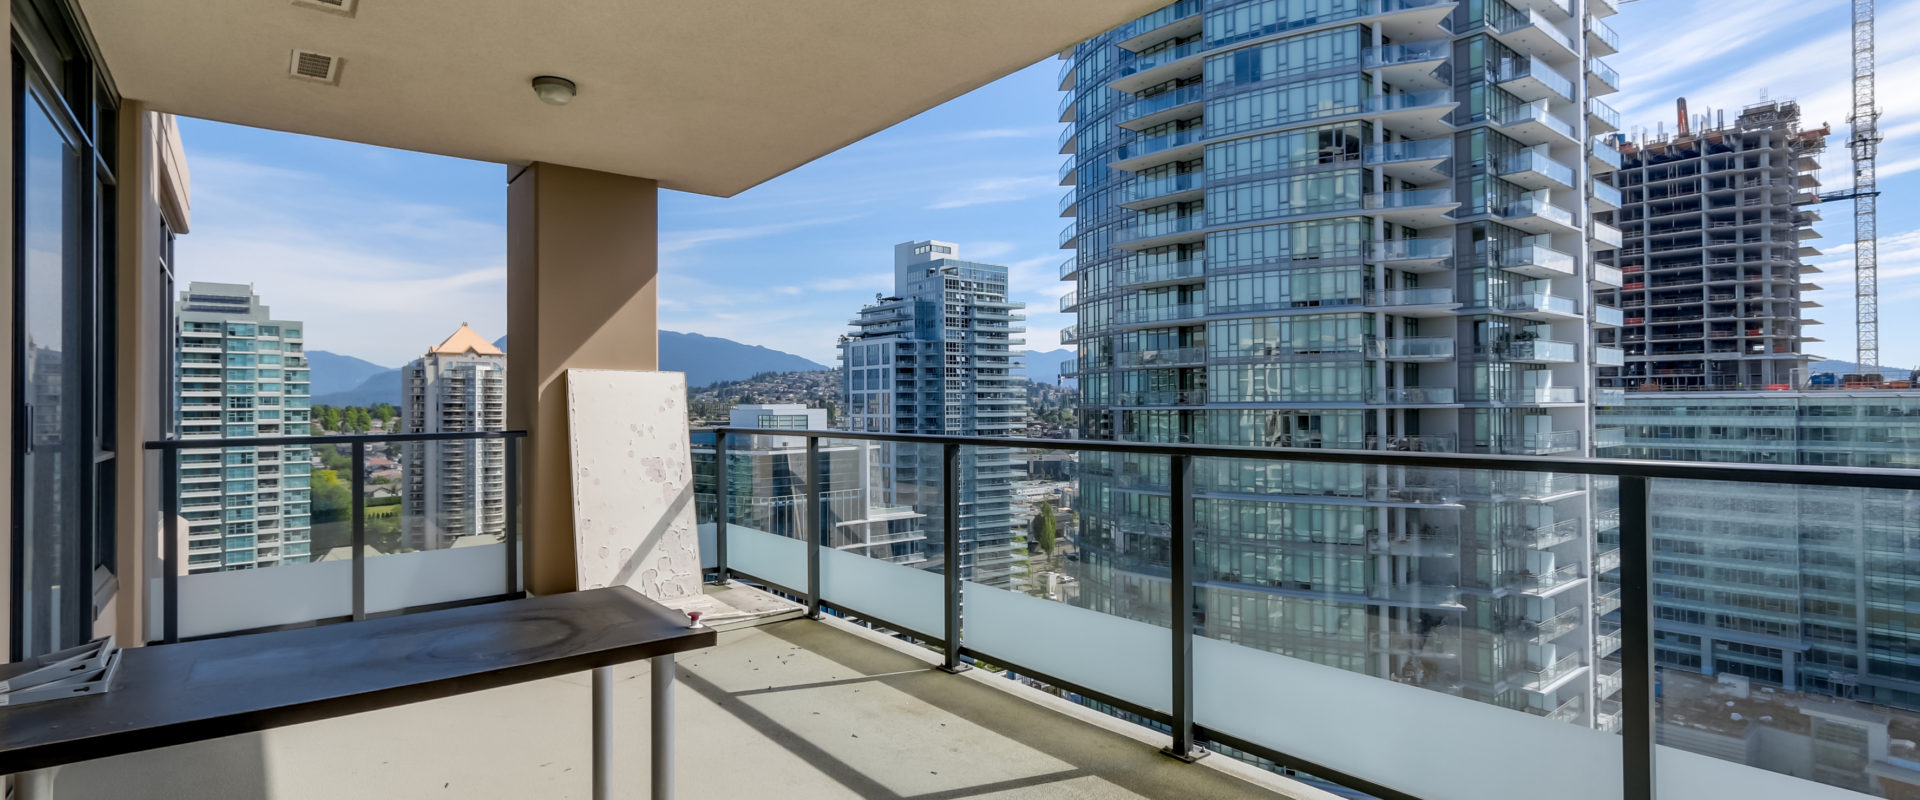 Brentwood 2 bdrm High-rise with Amazing Mountain&City View